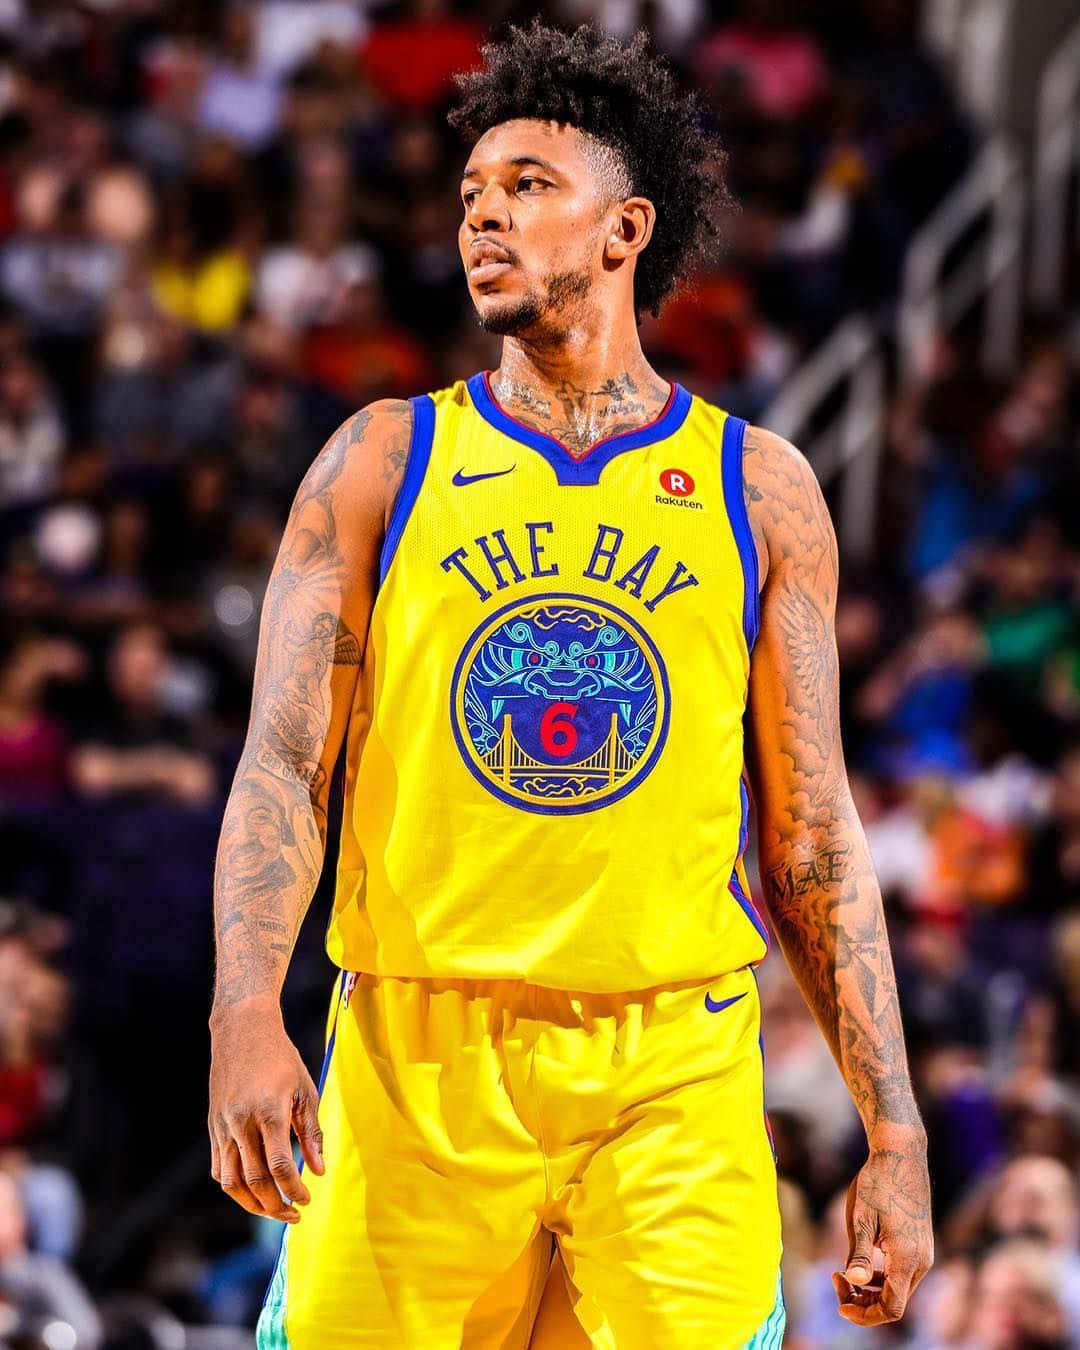 Nick Young Wearing The Bay Uniform Background